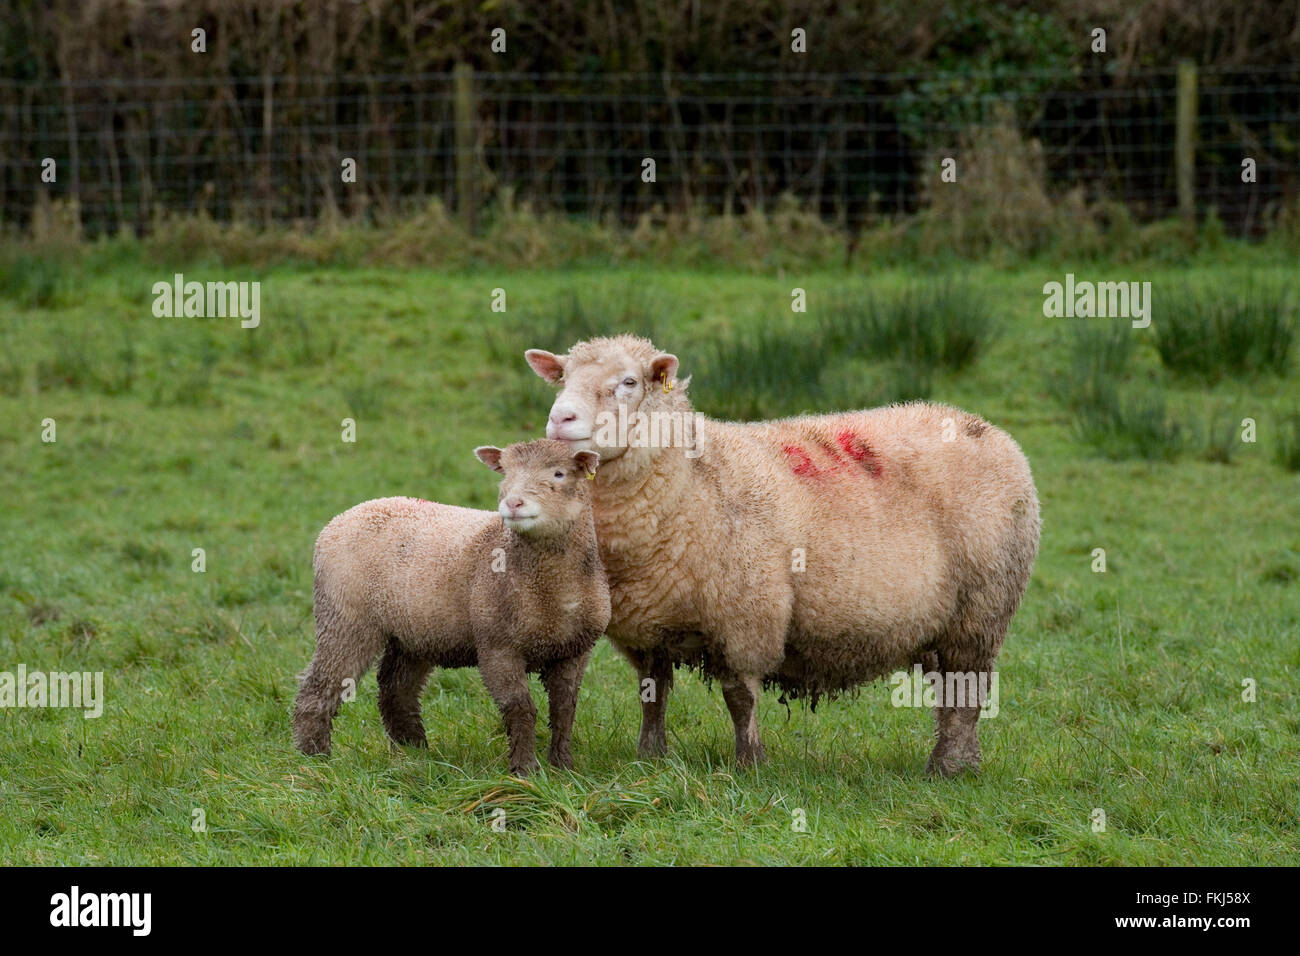 ewe and her lamb standing in a field Stock Photo